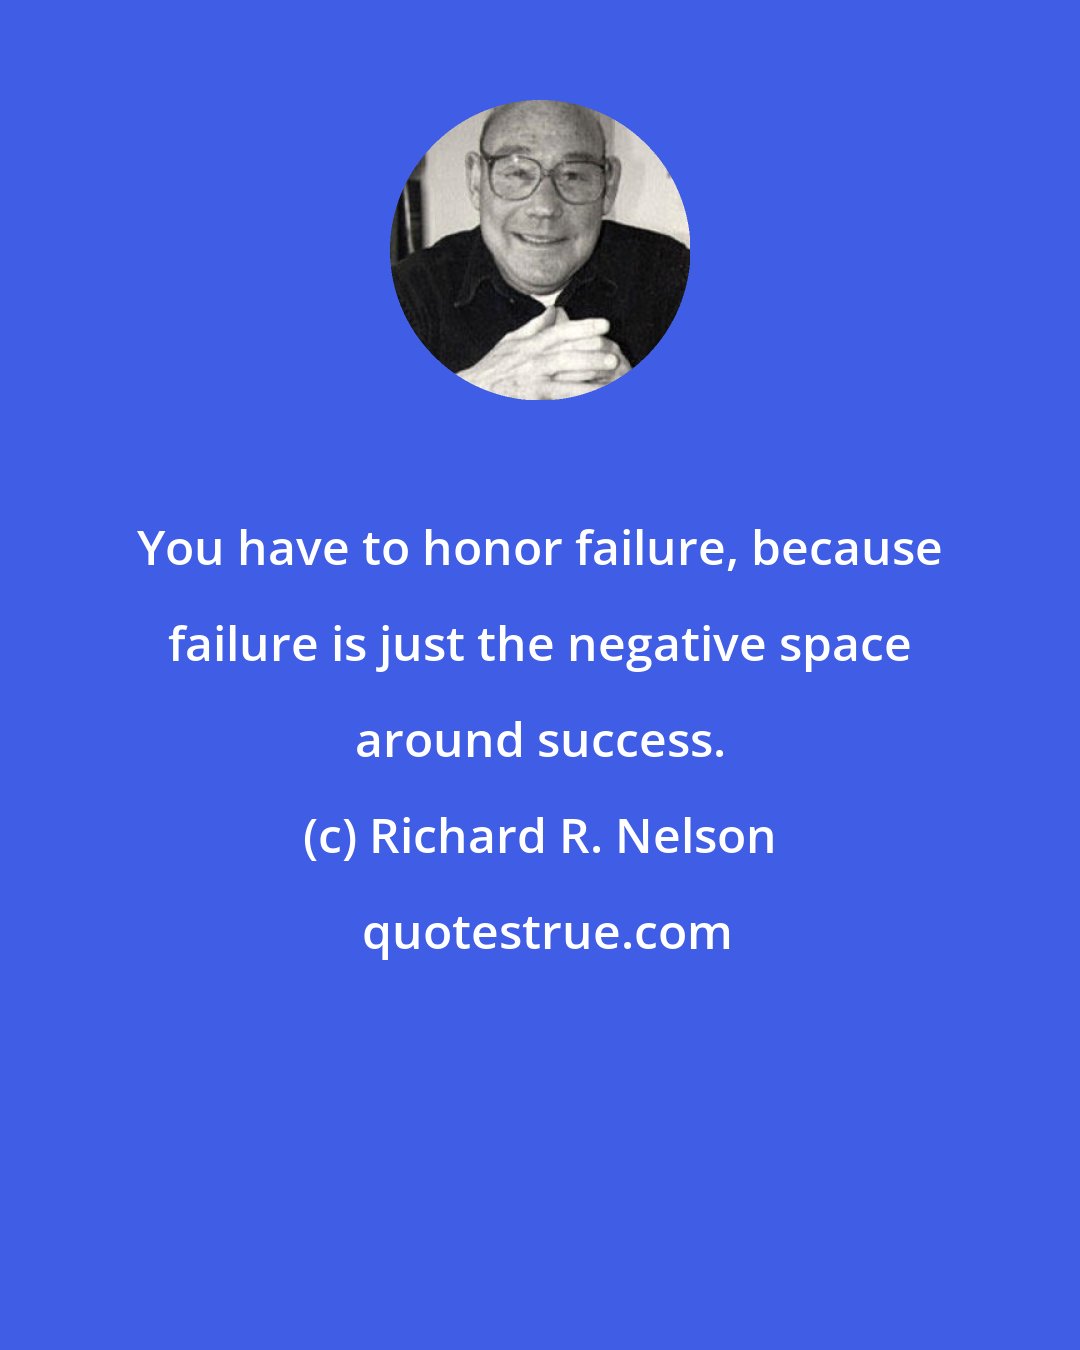 Richard R. Nelson: You have to honor failure, because failure is just the negative space around success.